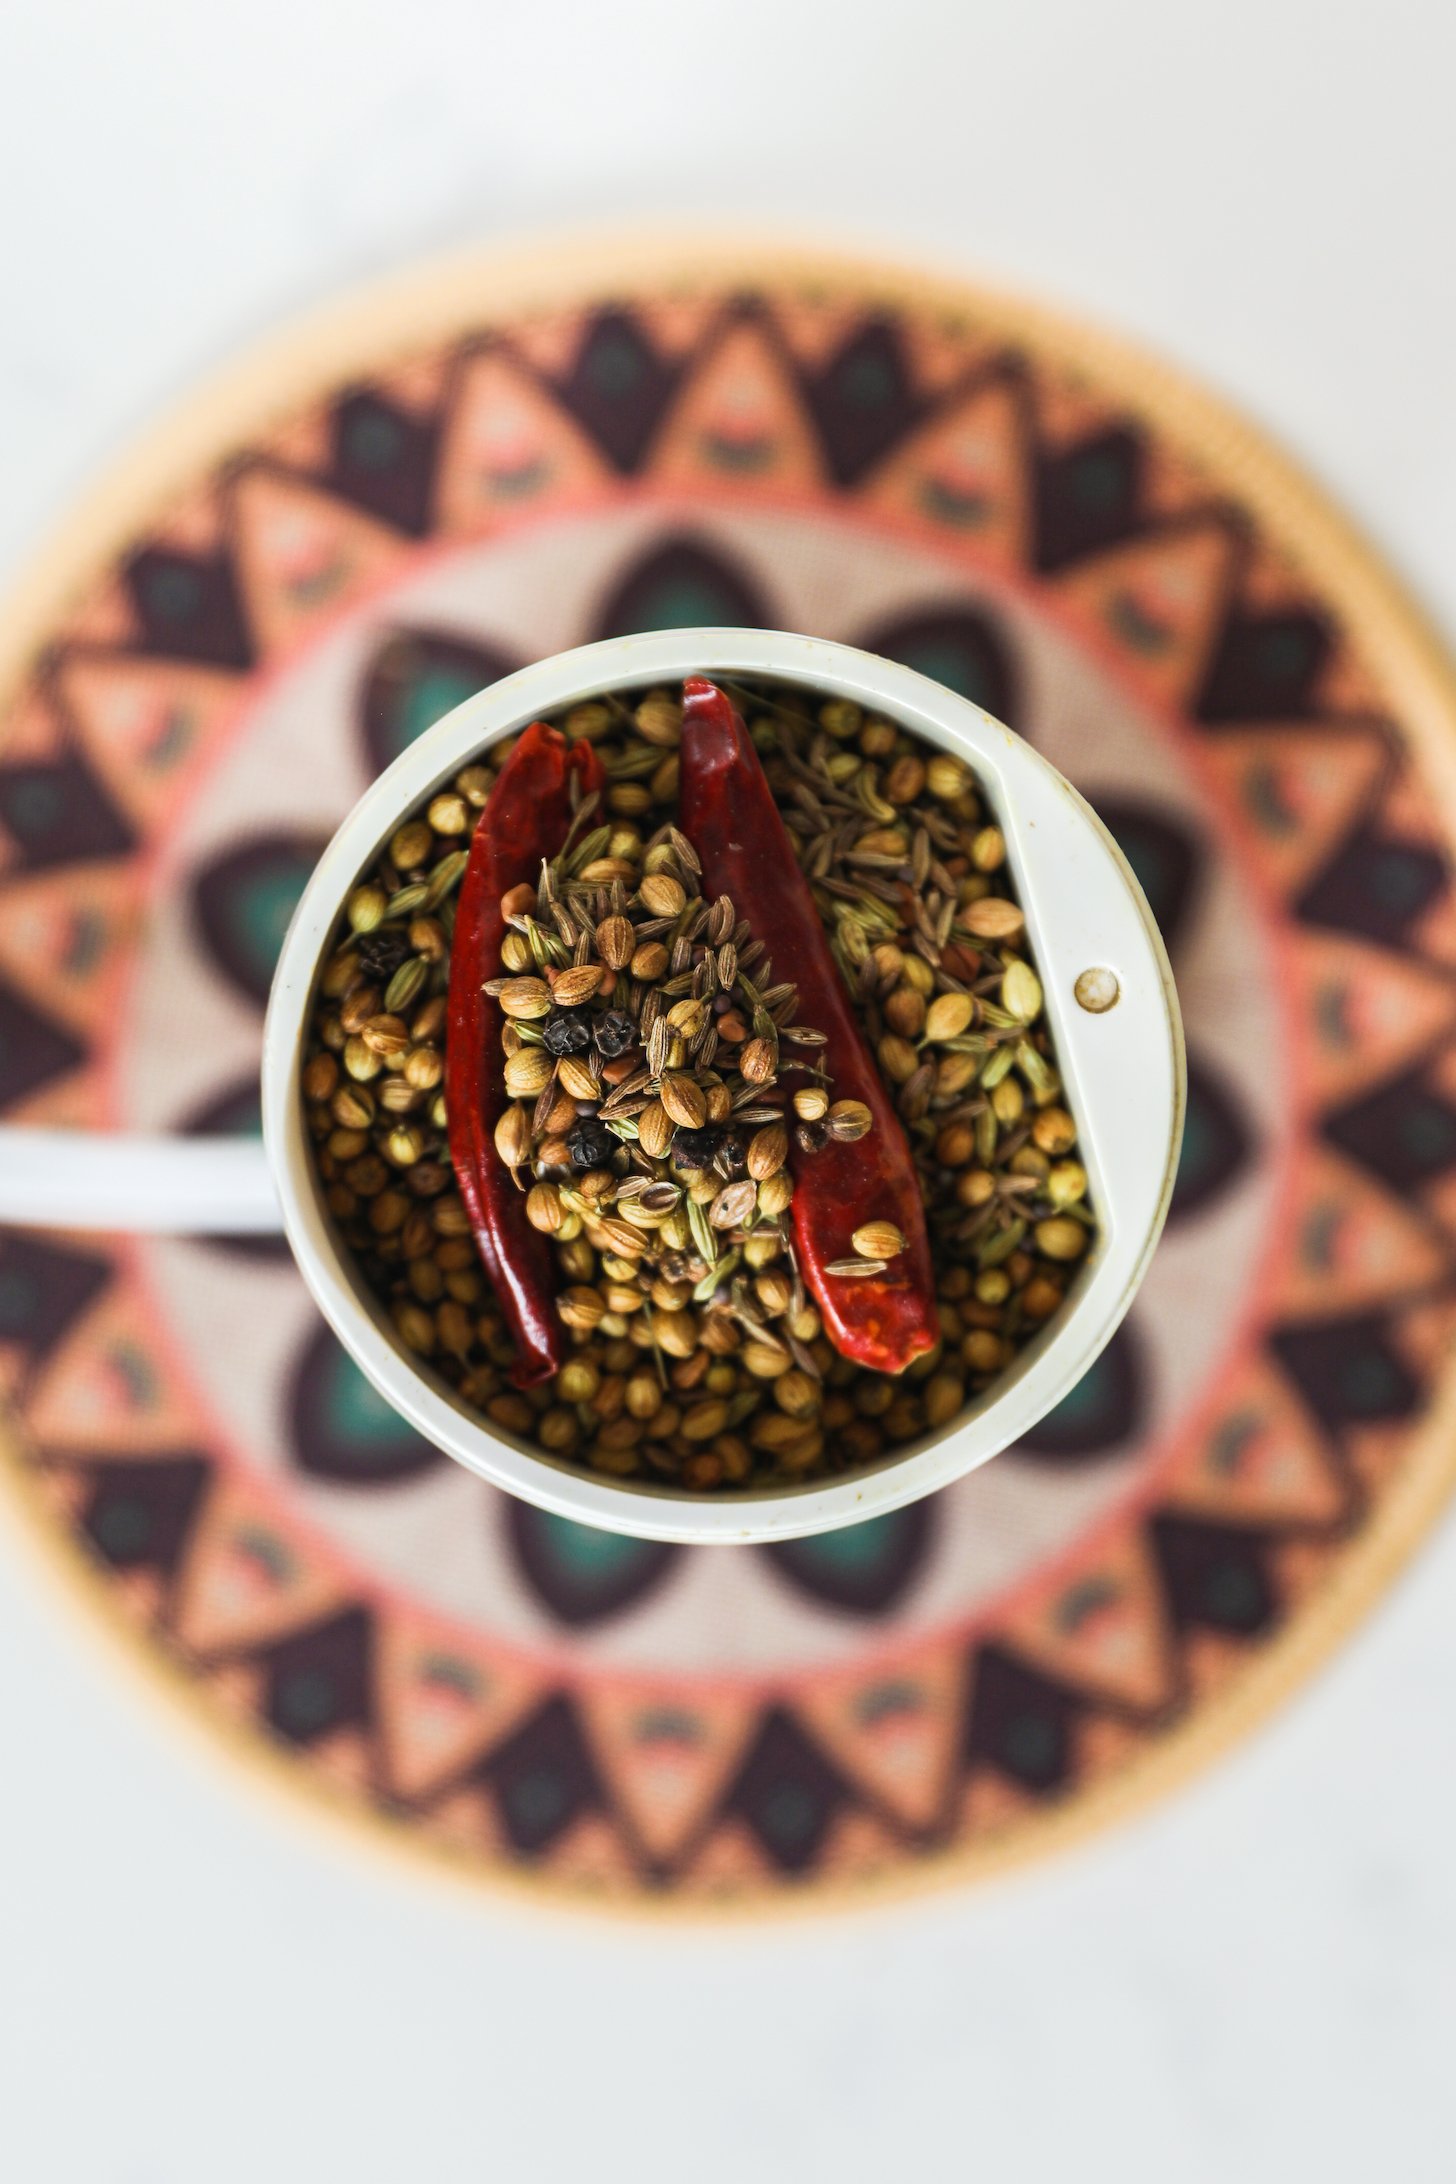 Top view of a coffee grinder with South Asian whole spices.